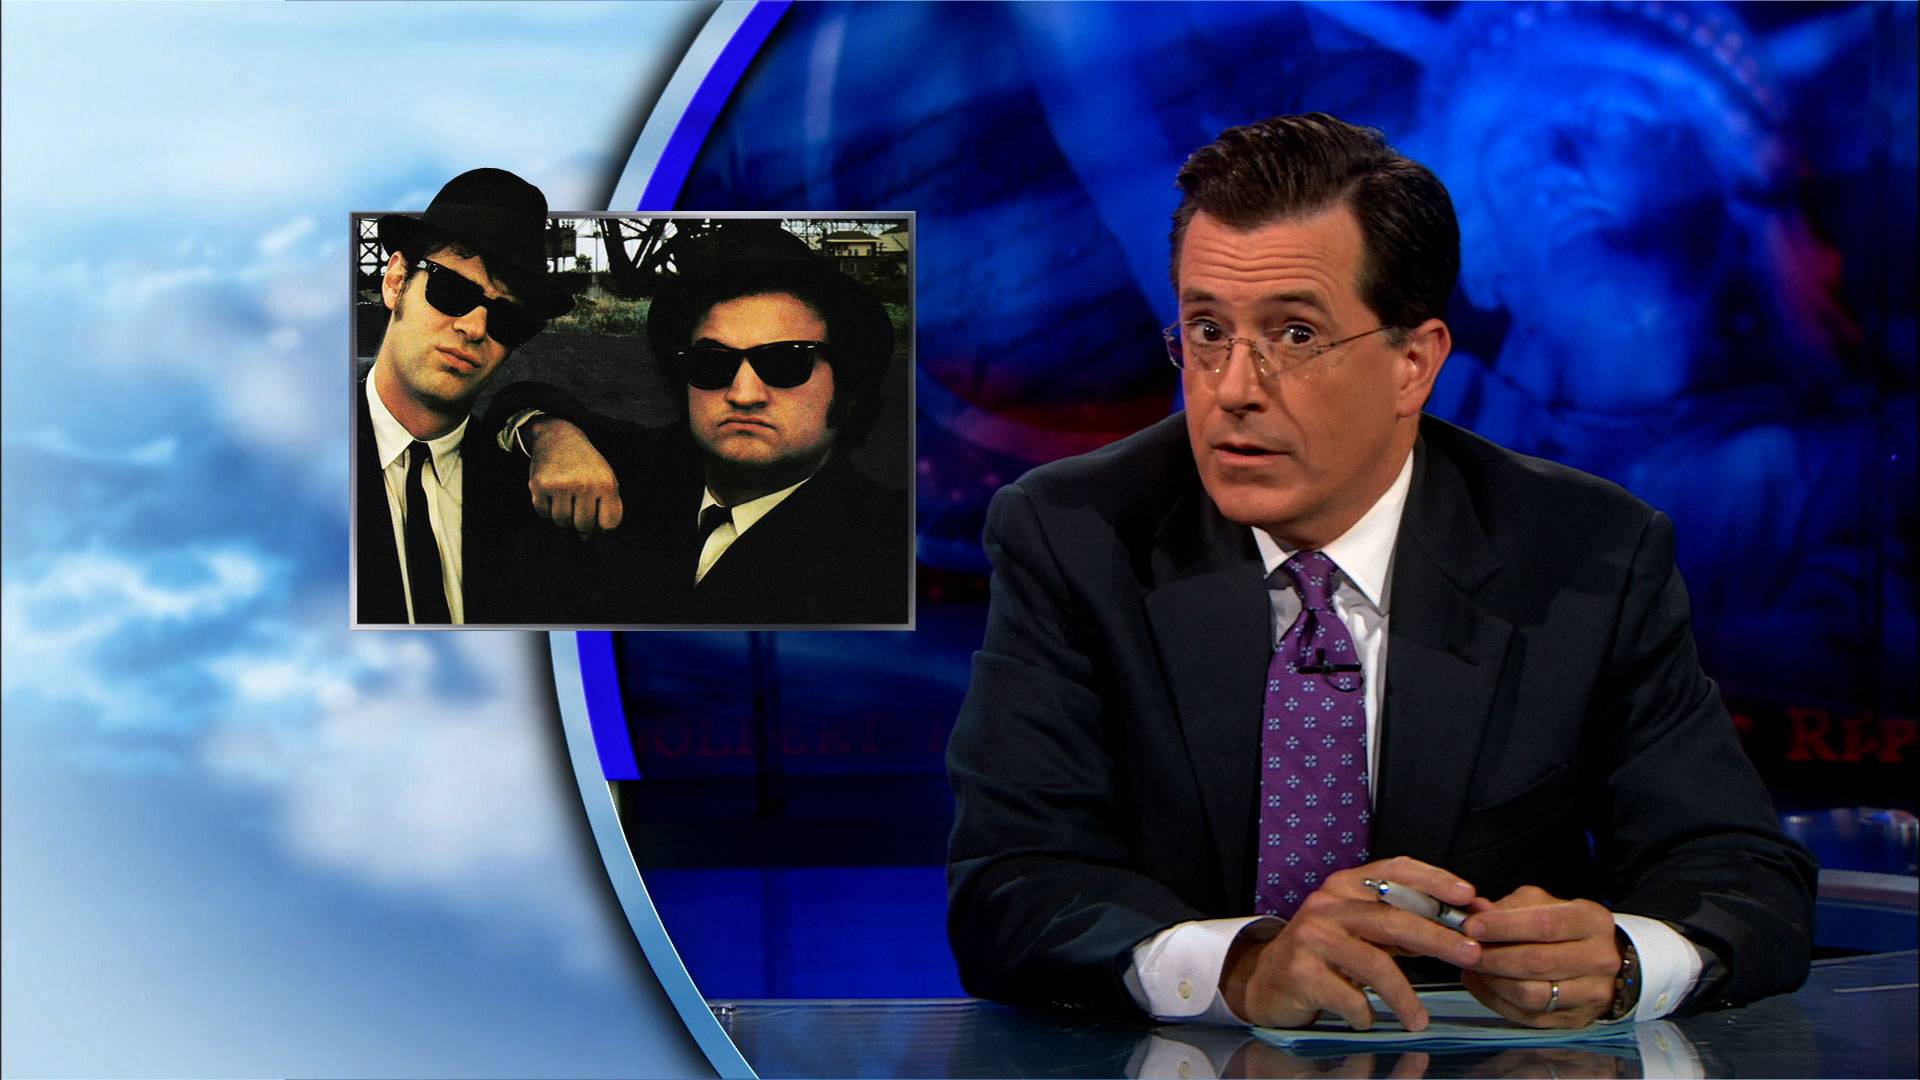 Yahweh Or No Way The Blues Brothers And Glenn Beck The Colbert Report